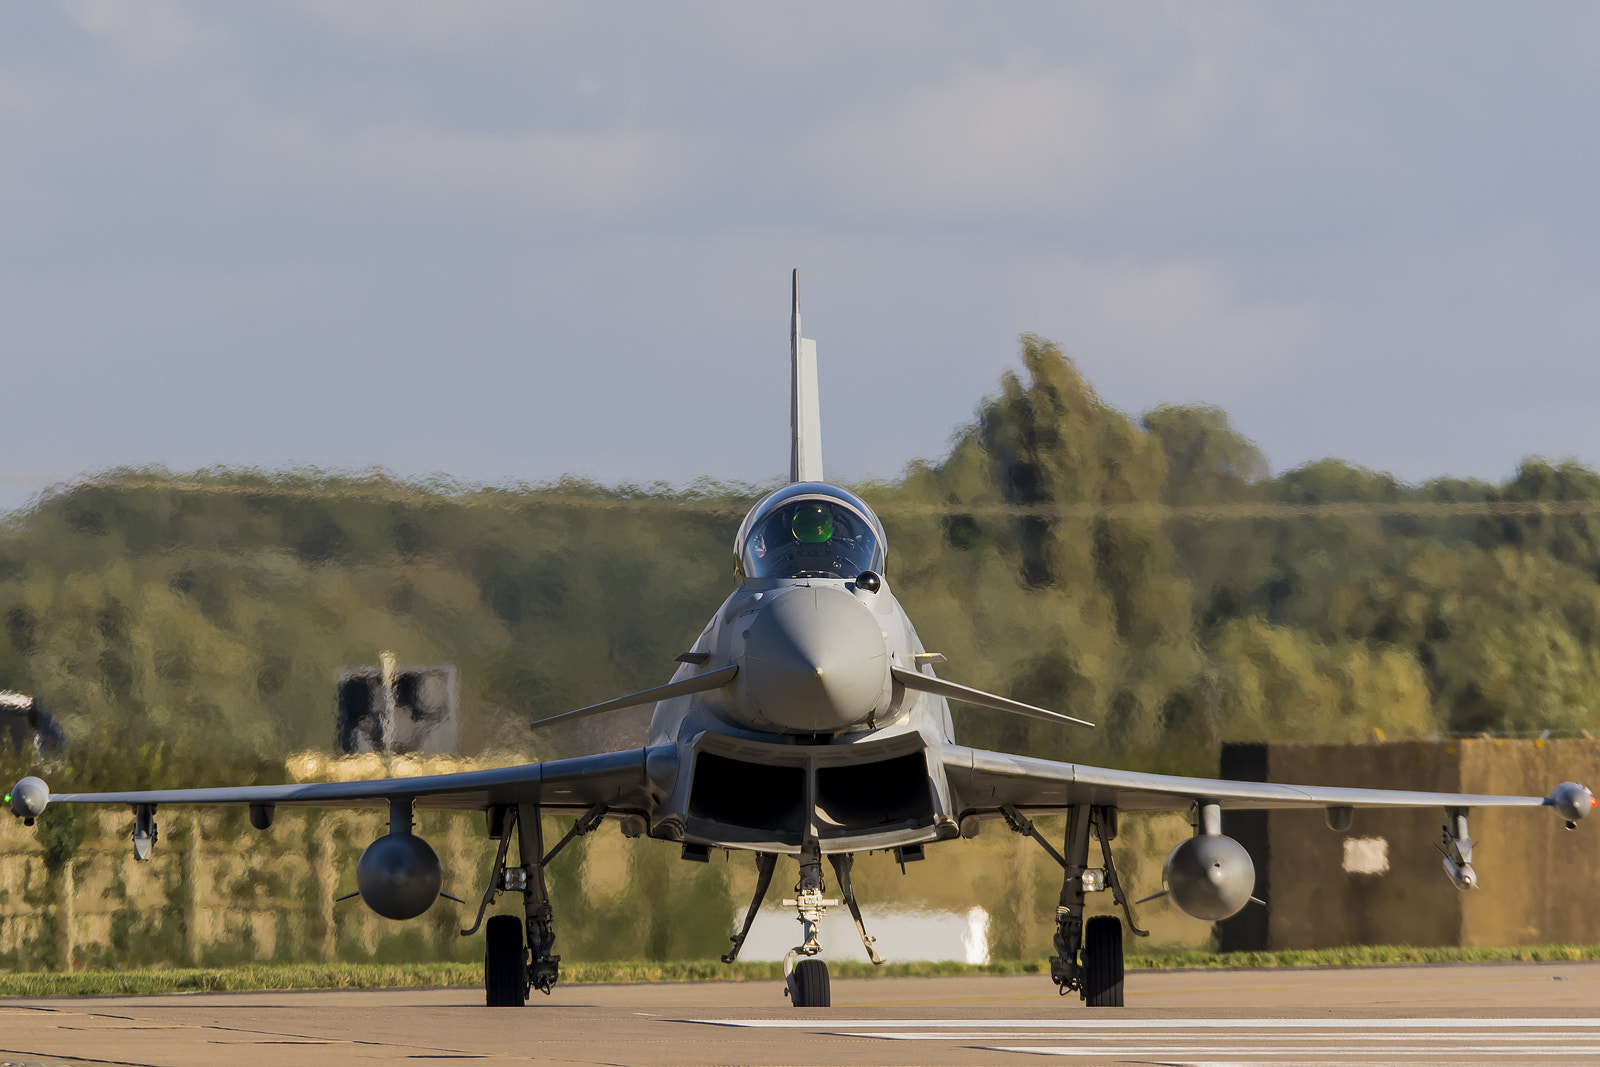 Nikon D7100 sample photo. Face to face with 29(r) sqn typhoon photography